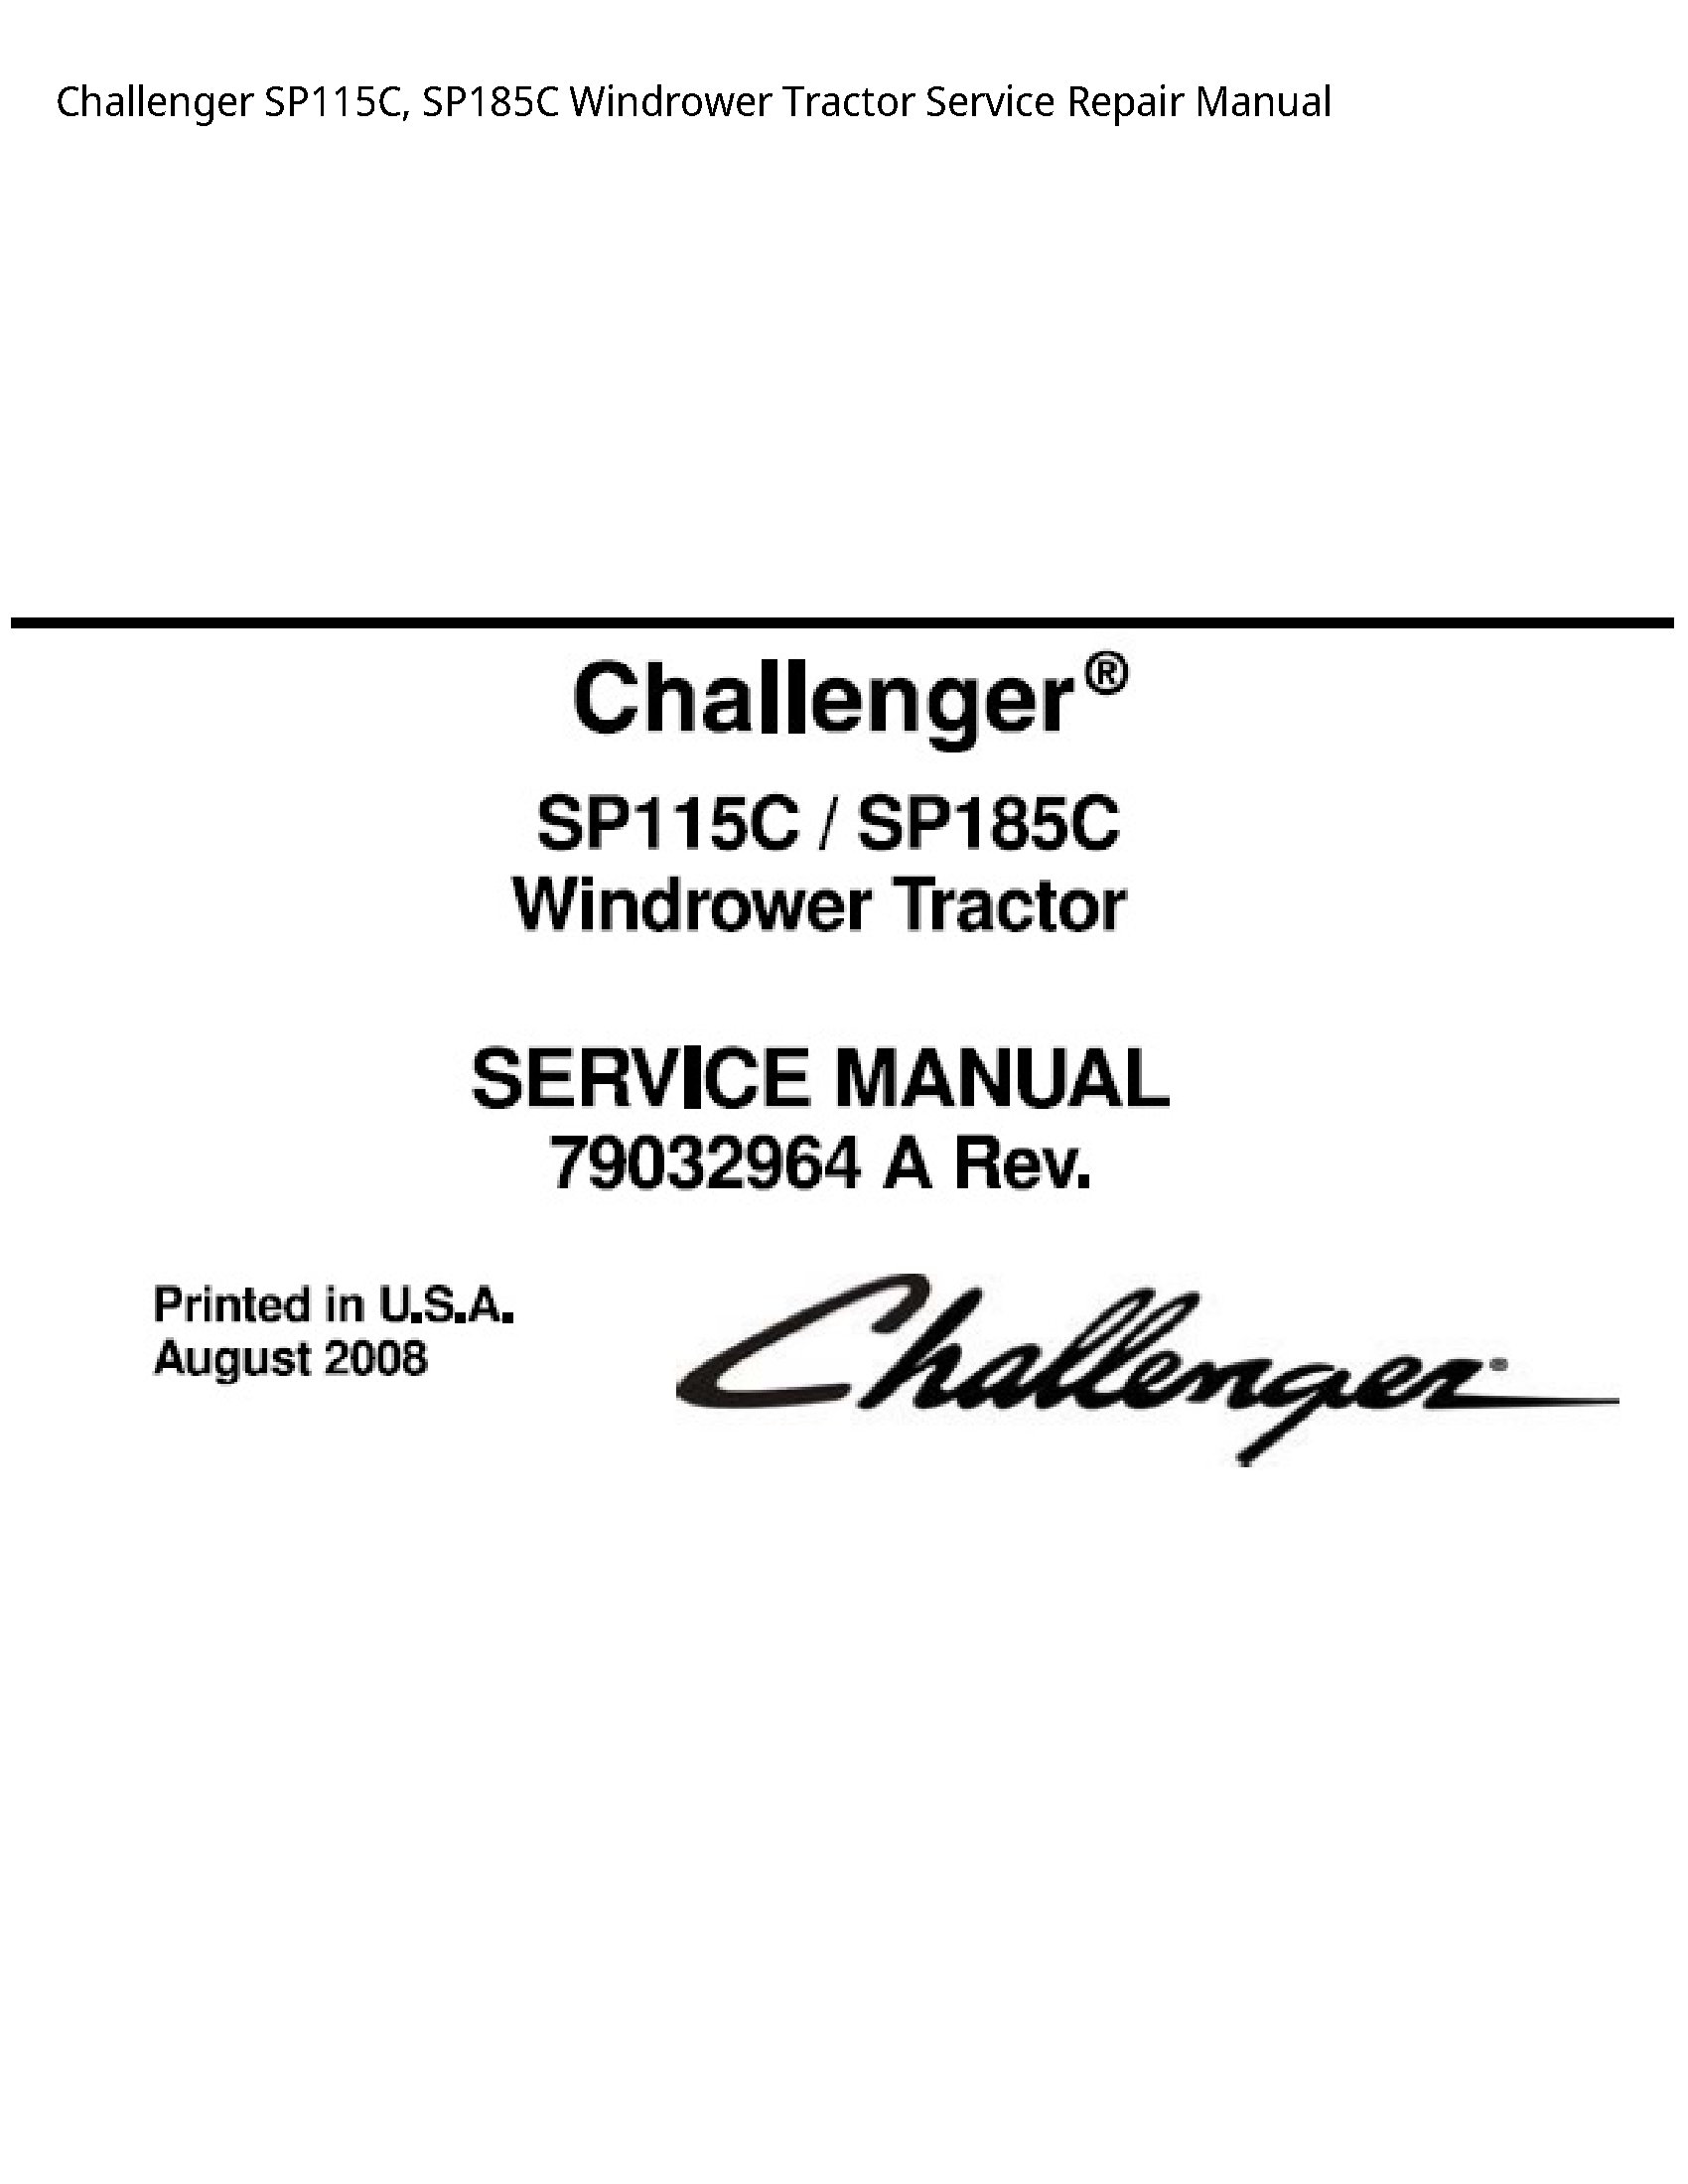 Challenger SP115C Windrower Tractor manual